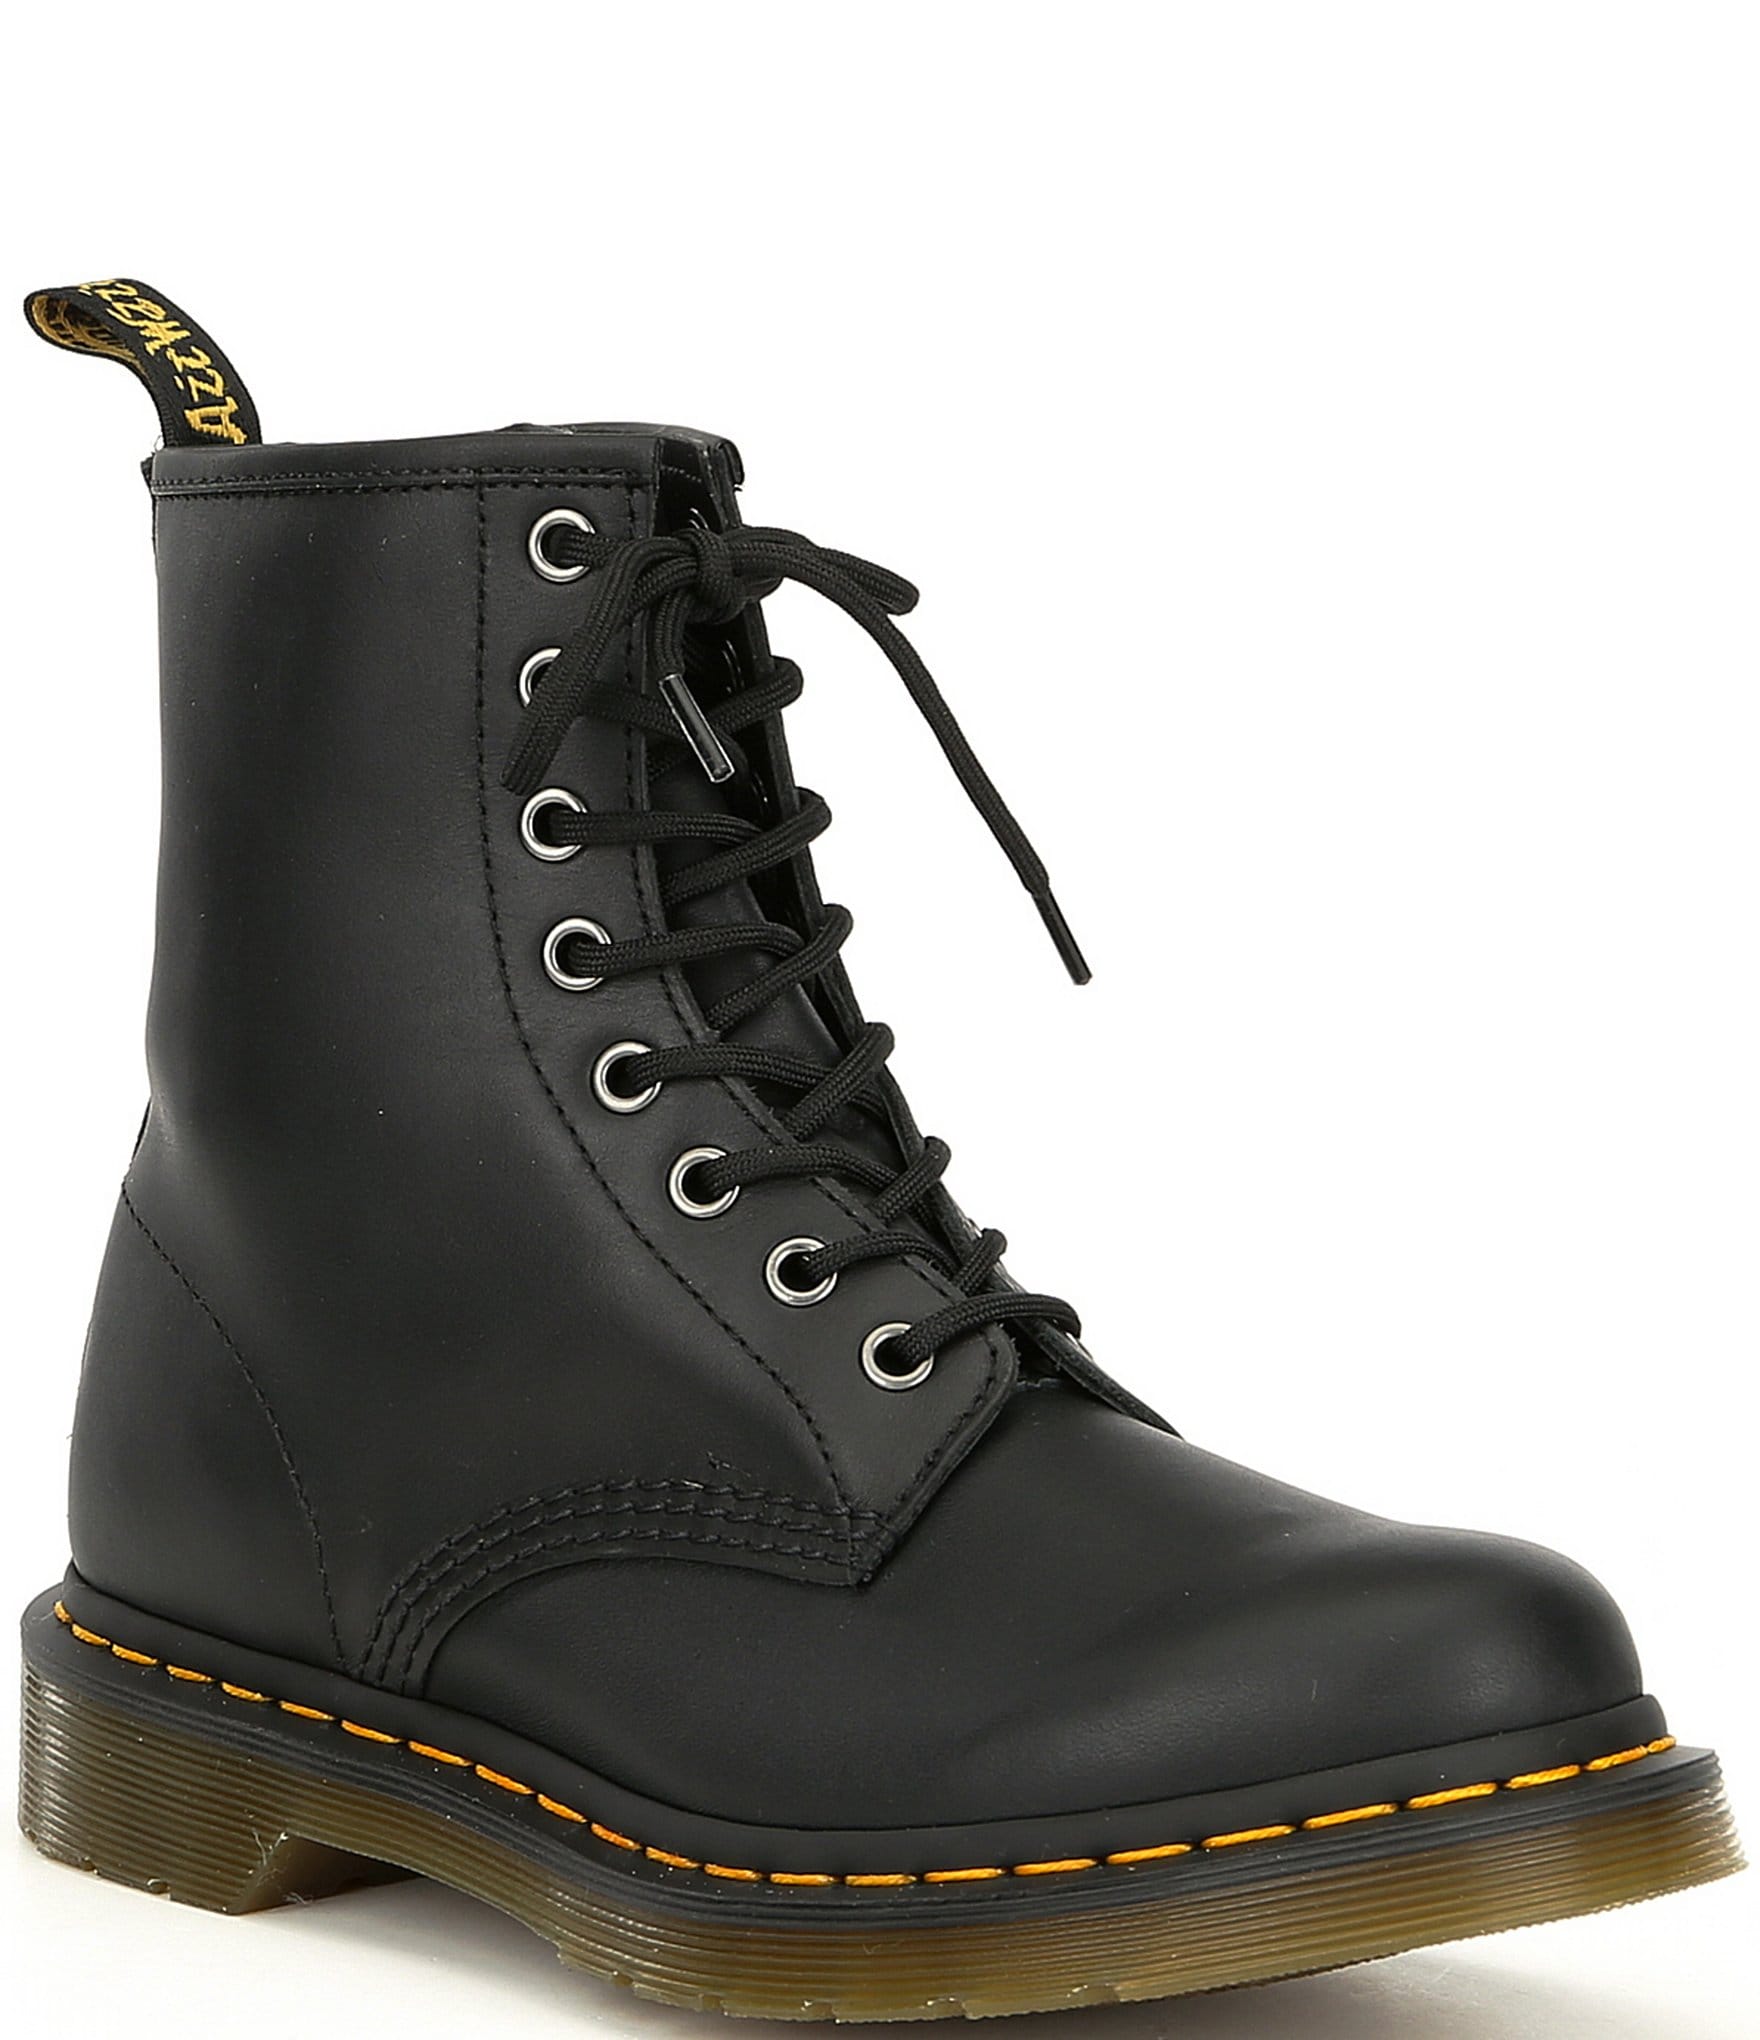 cheapest place to buy doc martens